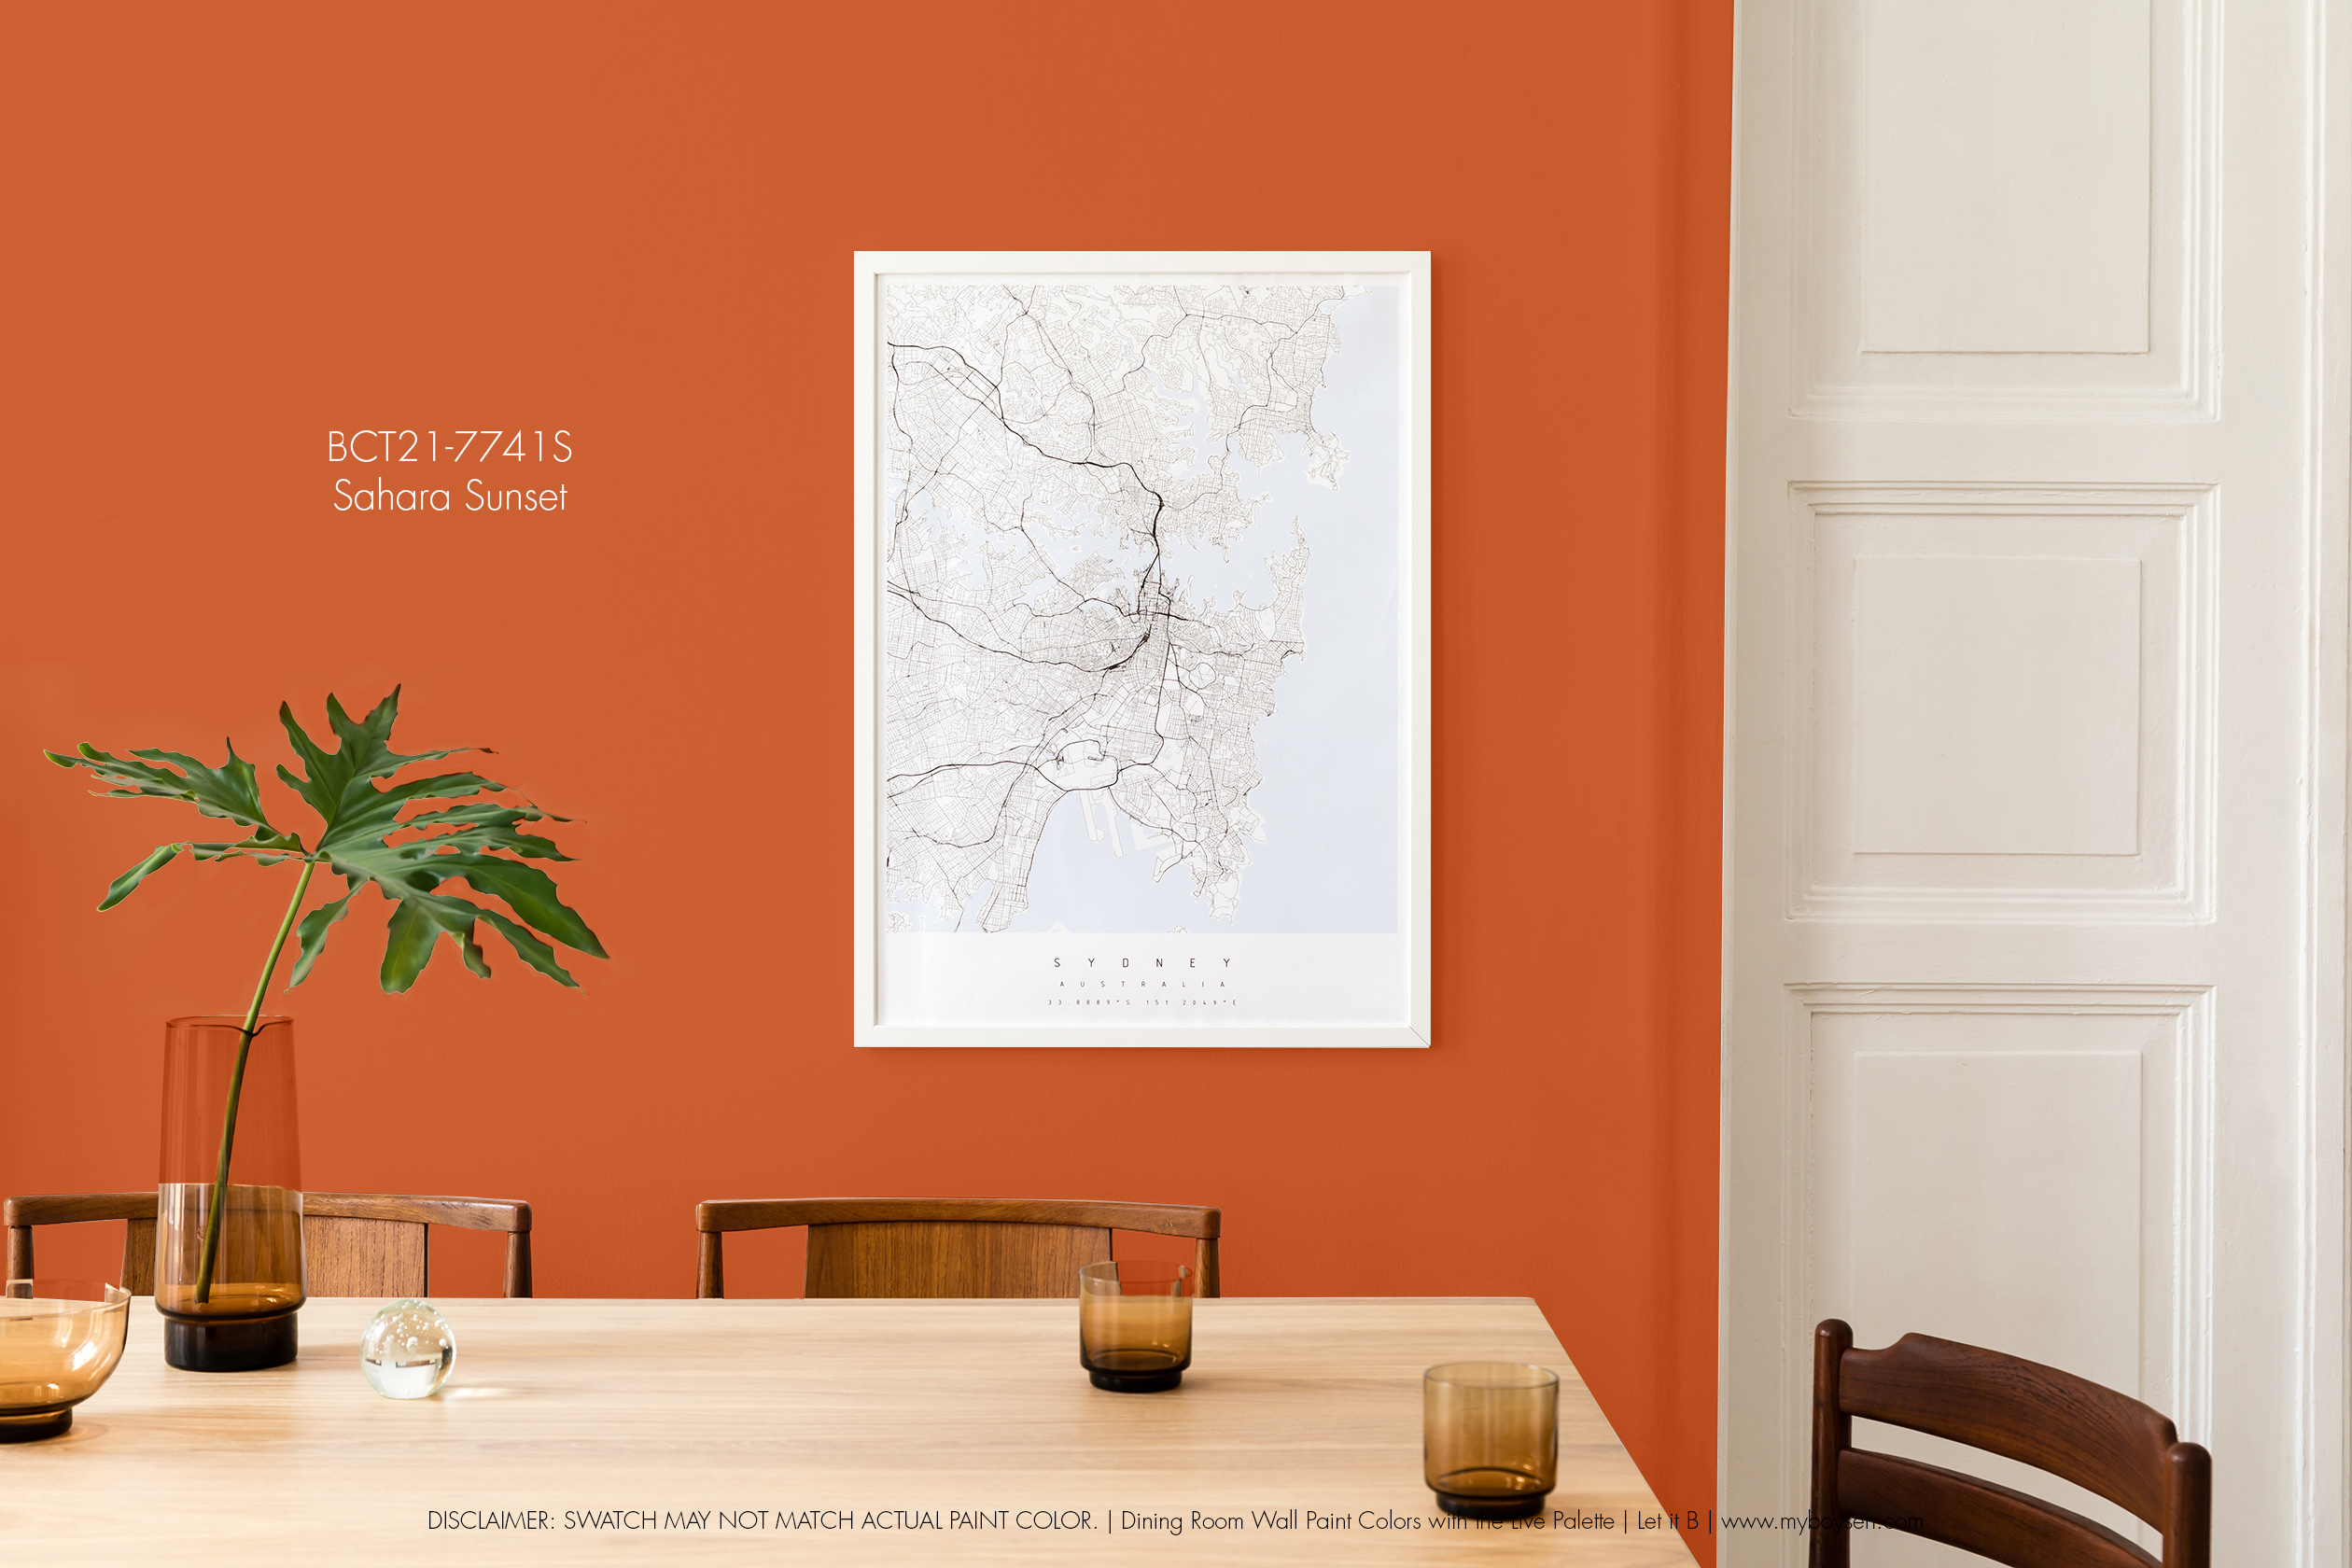 Dining Room Wall Paint Colors with the Live Palette | MyBoysen